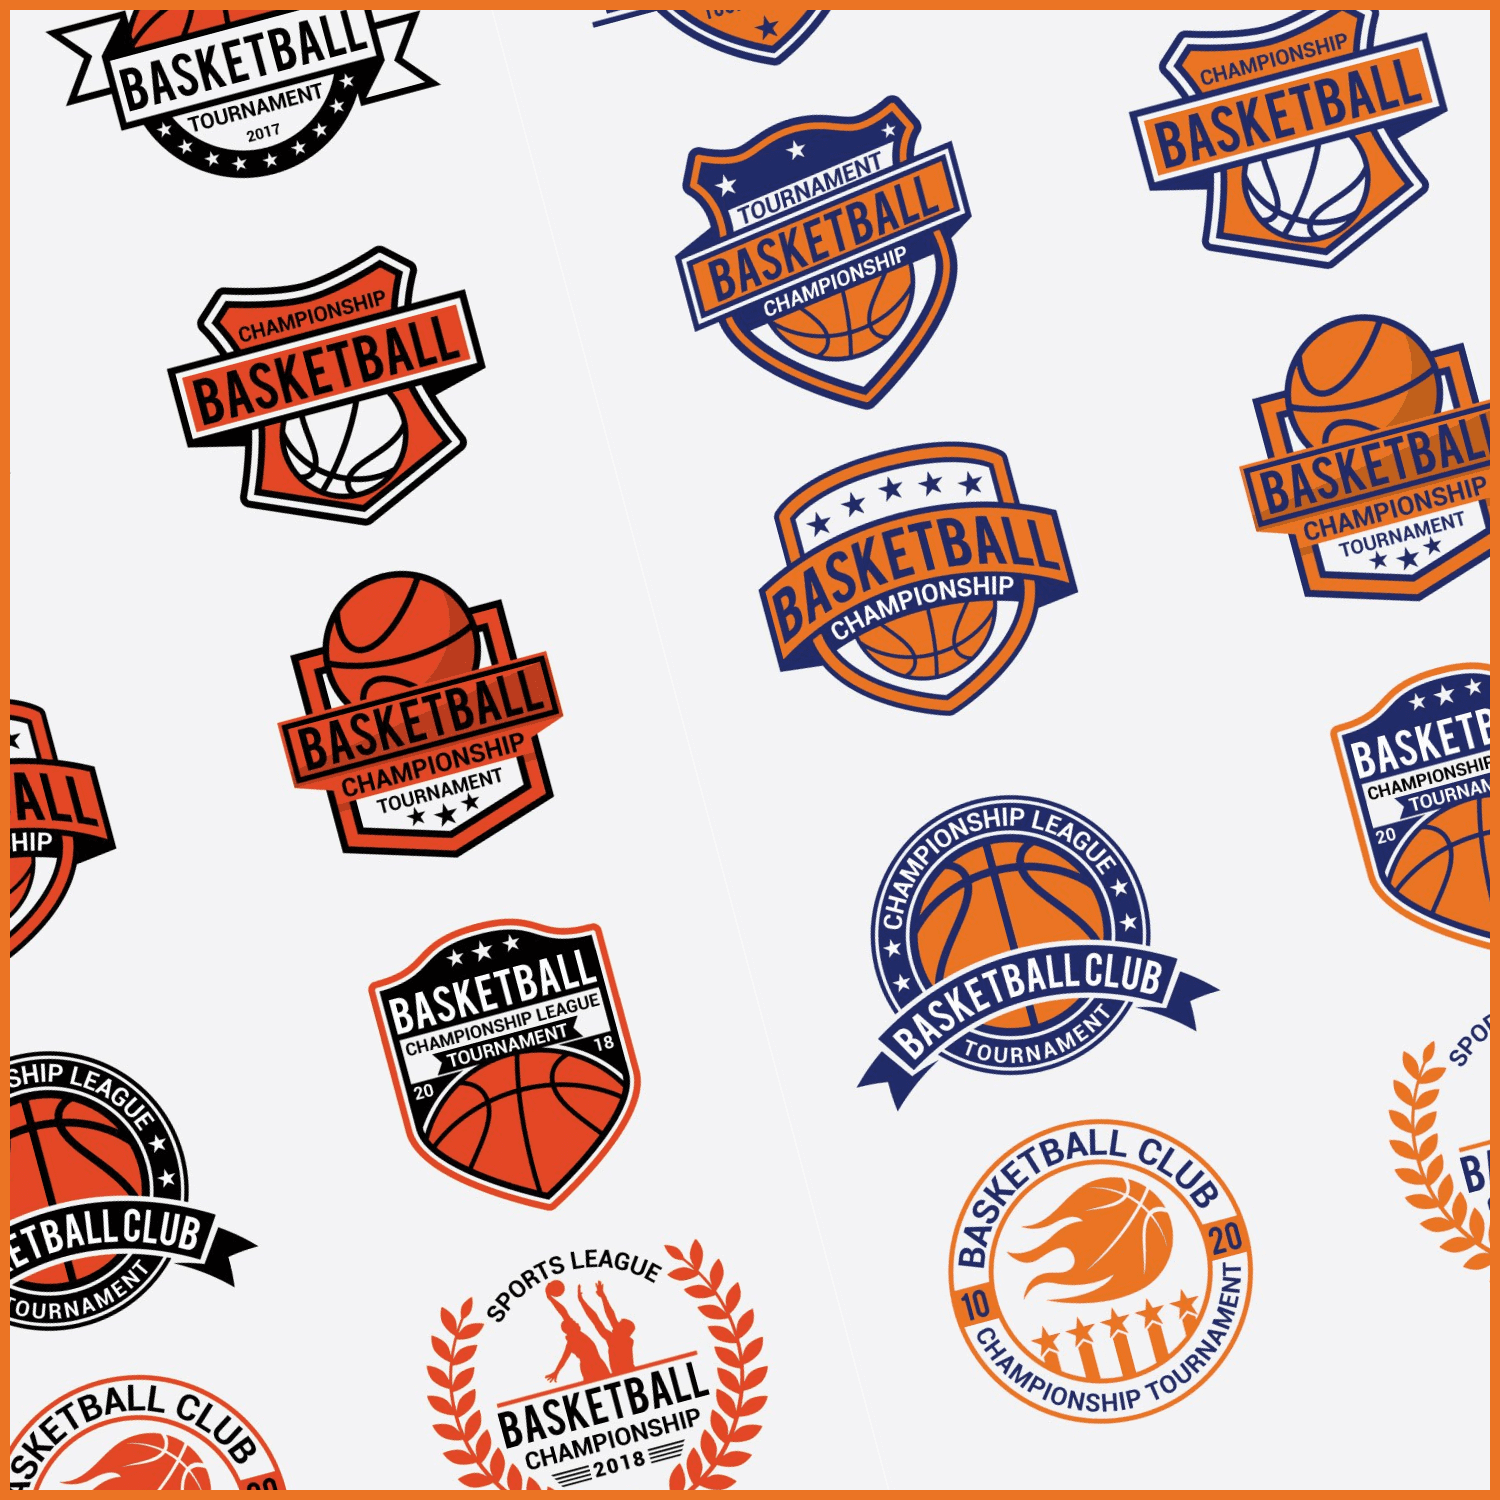 Basketball Badges & Stickers Vol2 cover.